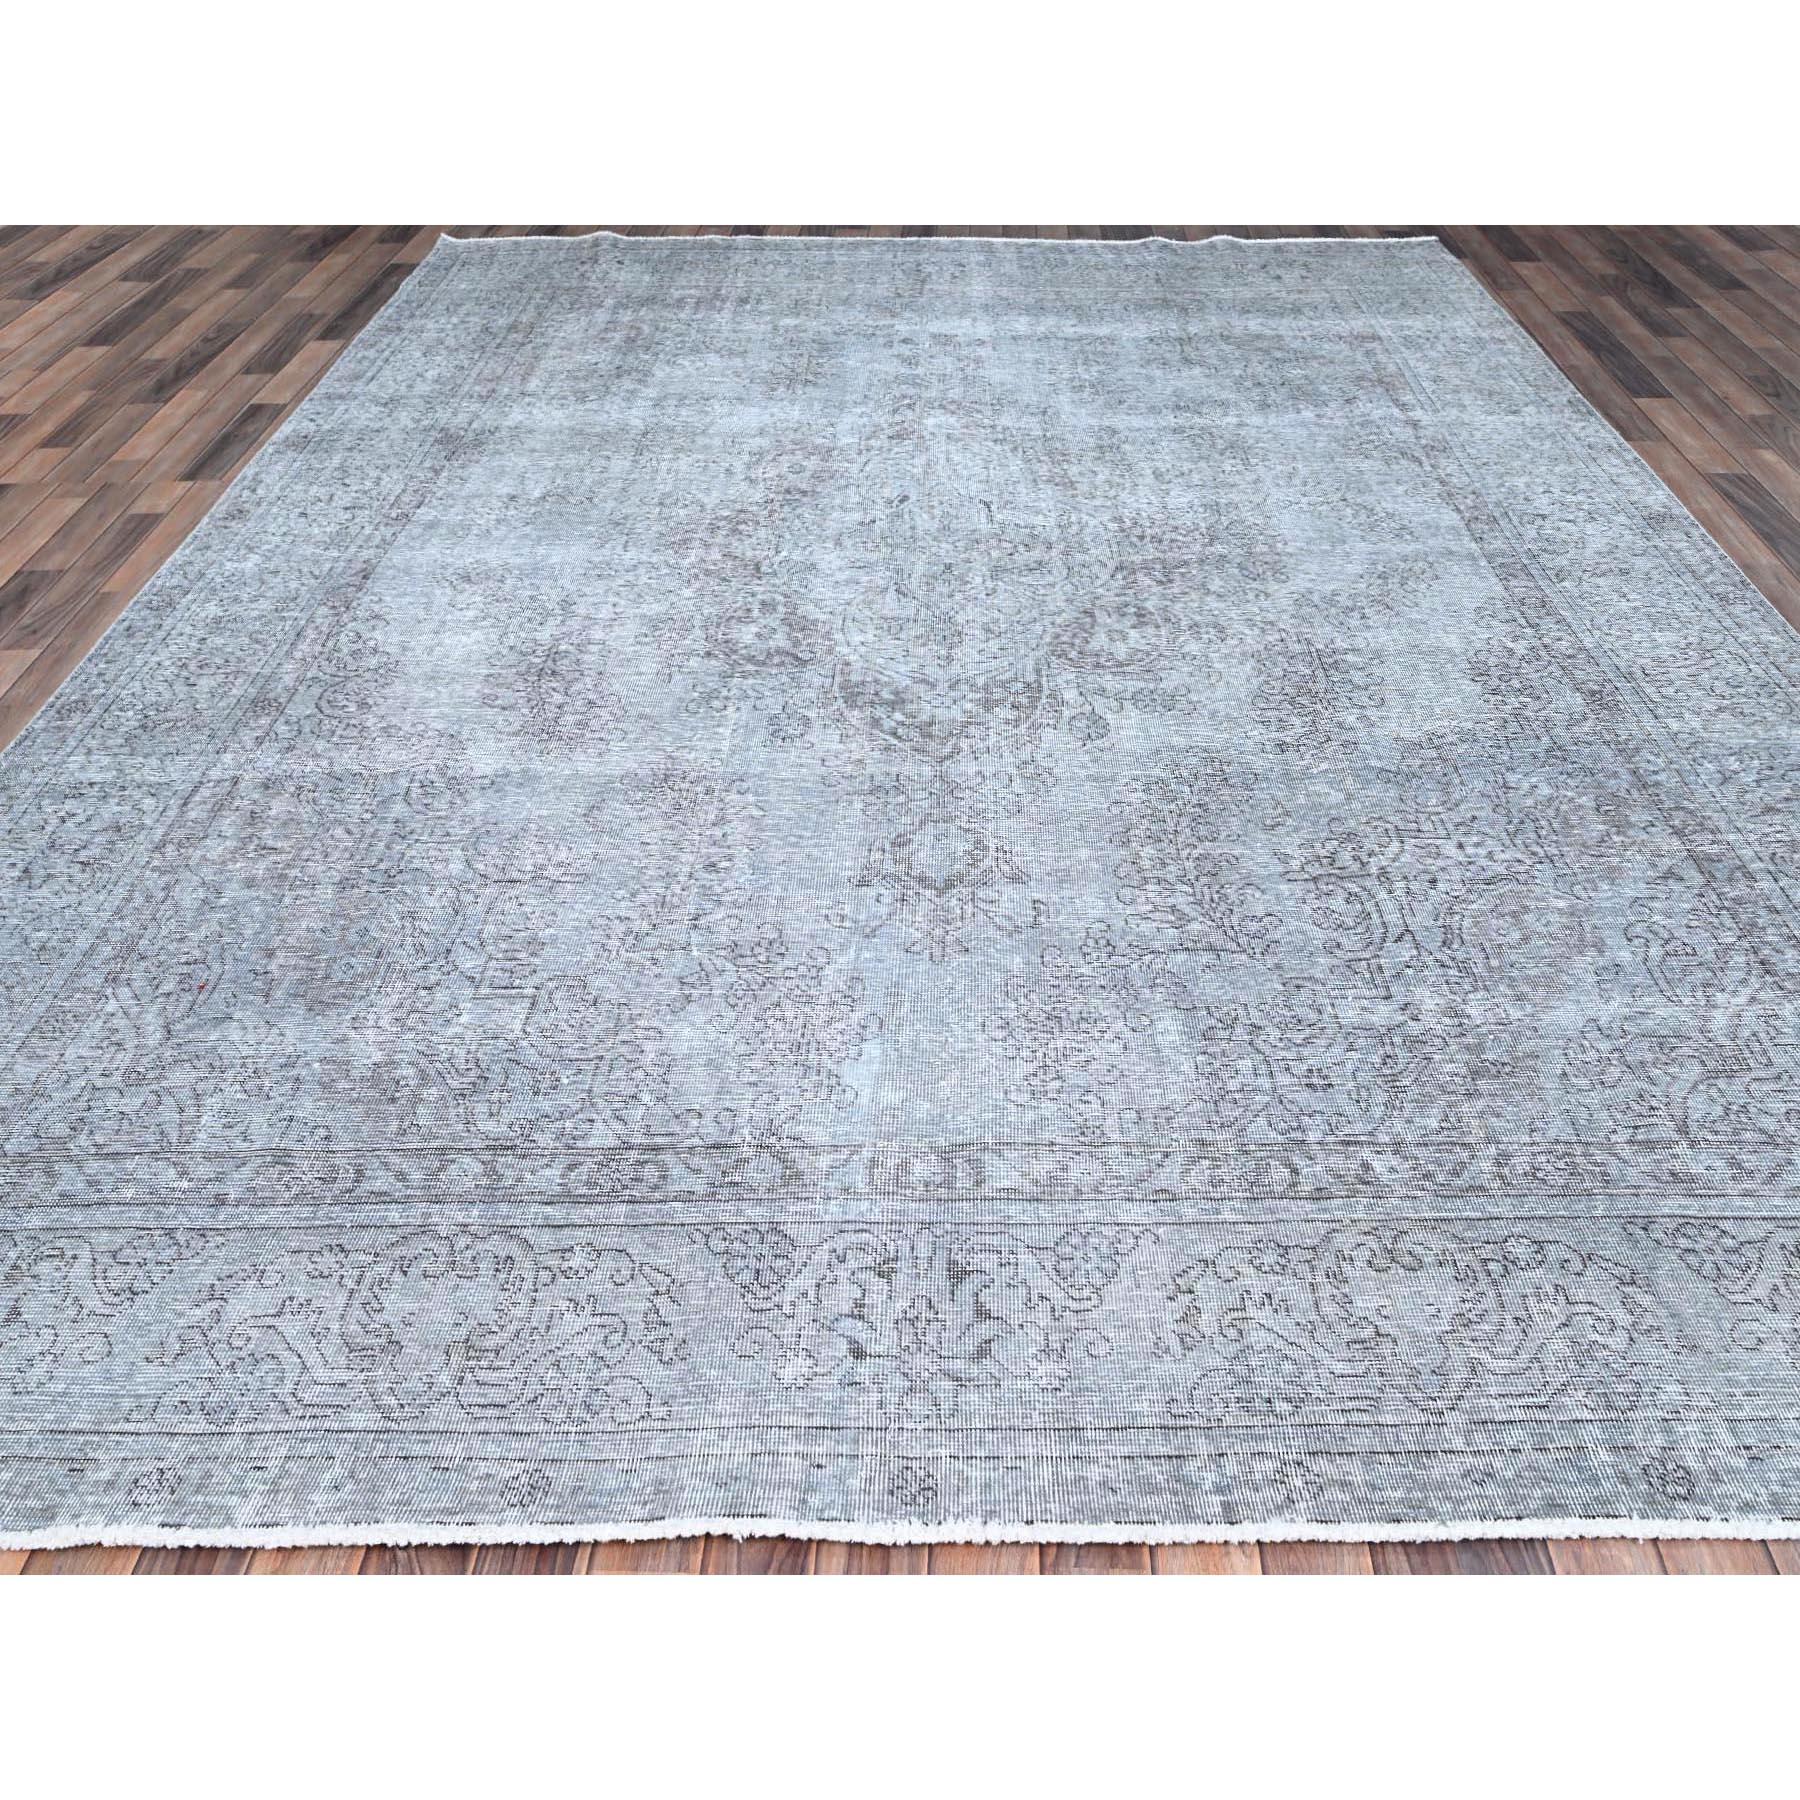 Medieval Gray Hand Knotted Wool Clean Vintage Persian Tabriz Worn Down Rustic Feel Rug For Sale